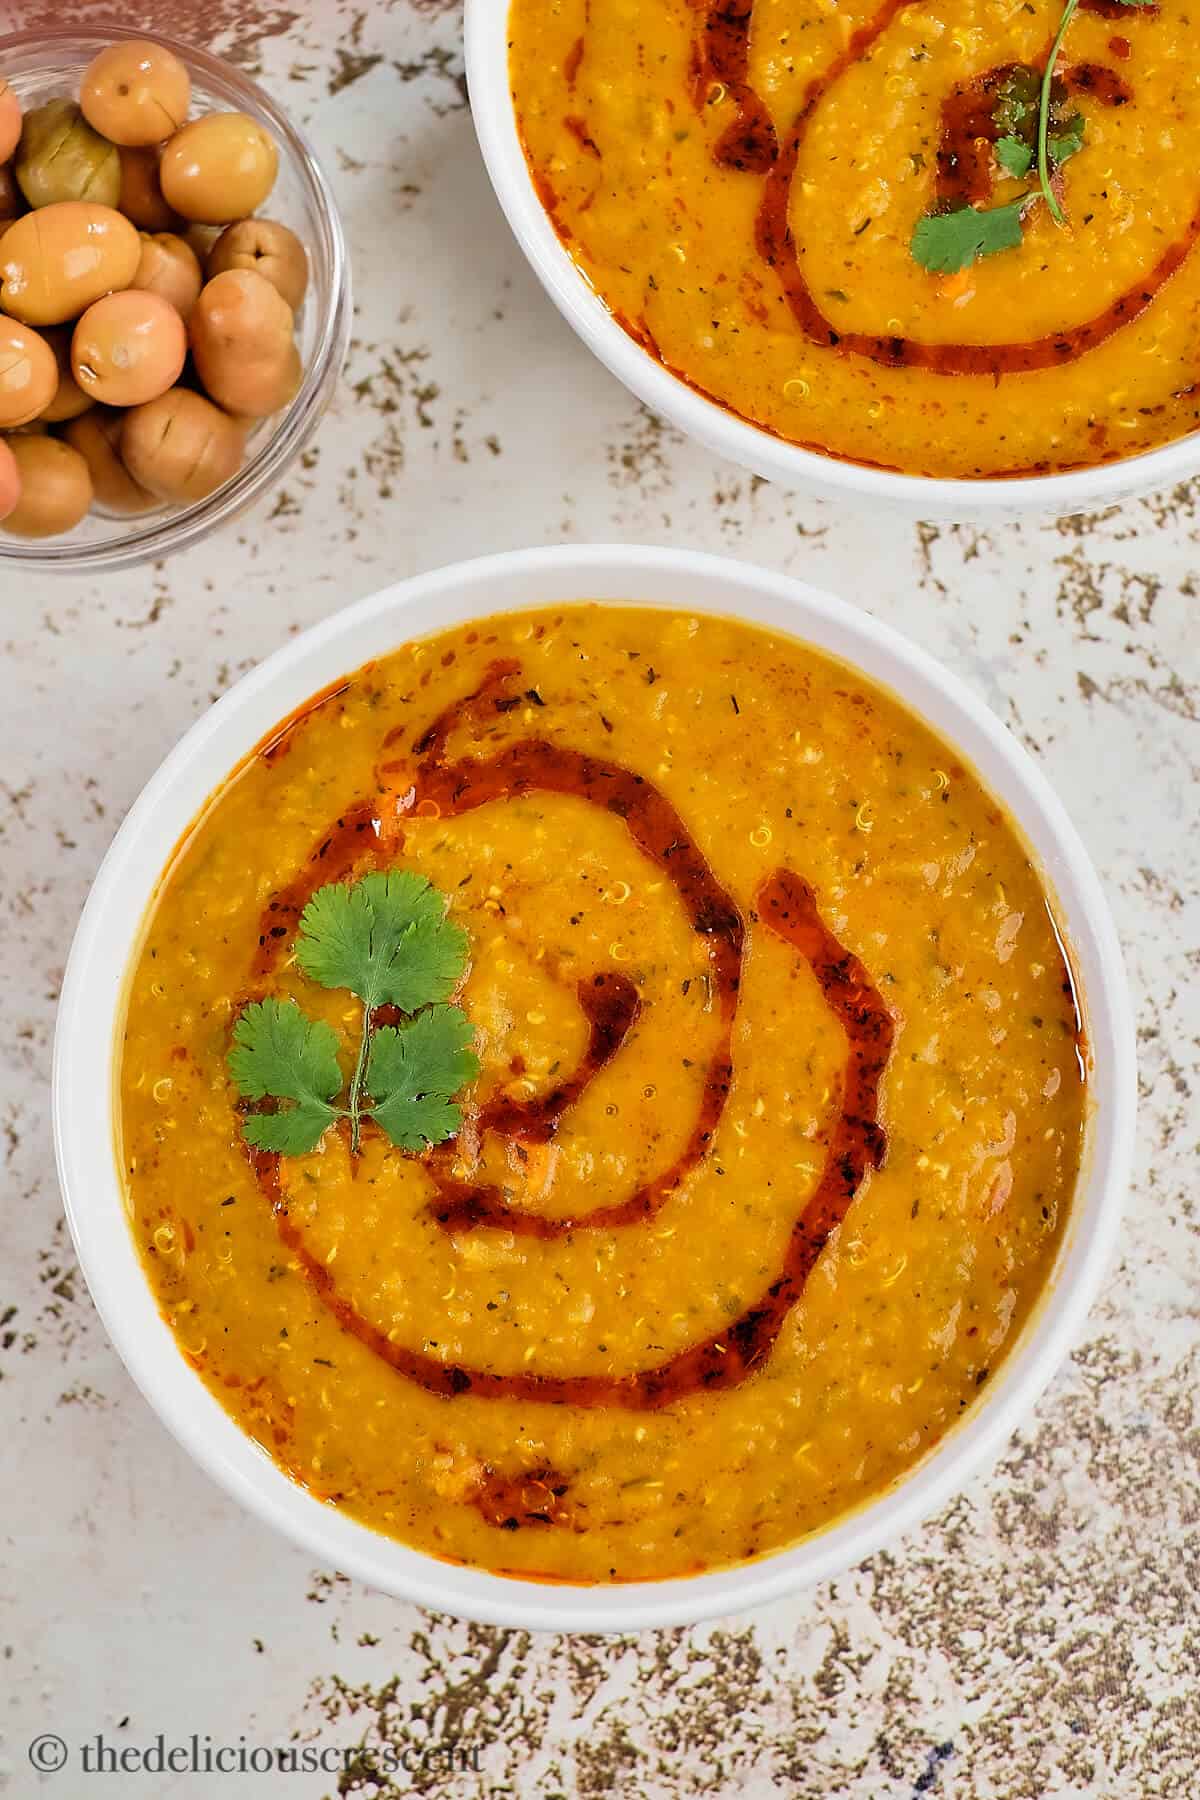 Turkish red lentil soup served in white bowls on the table.